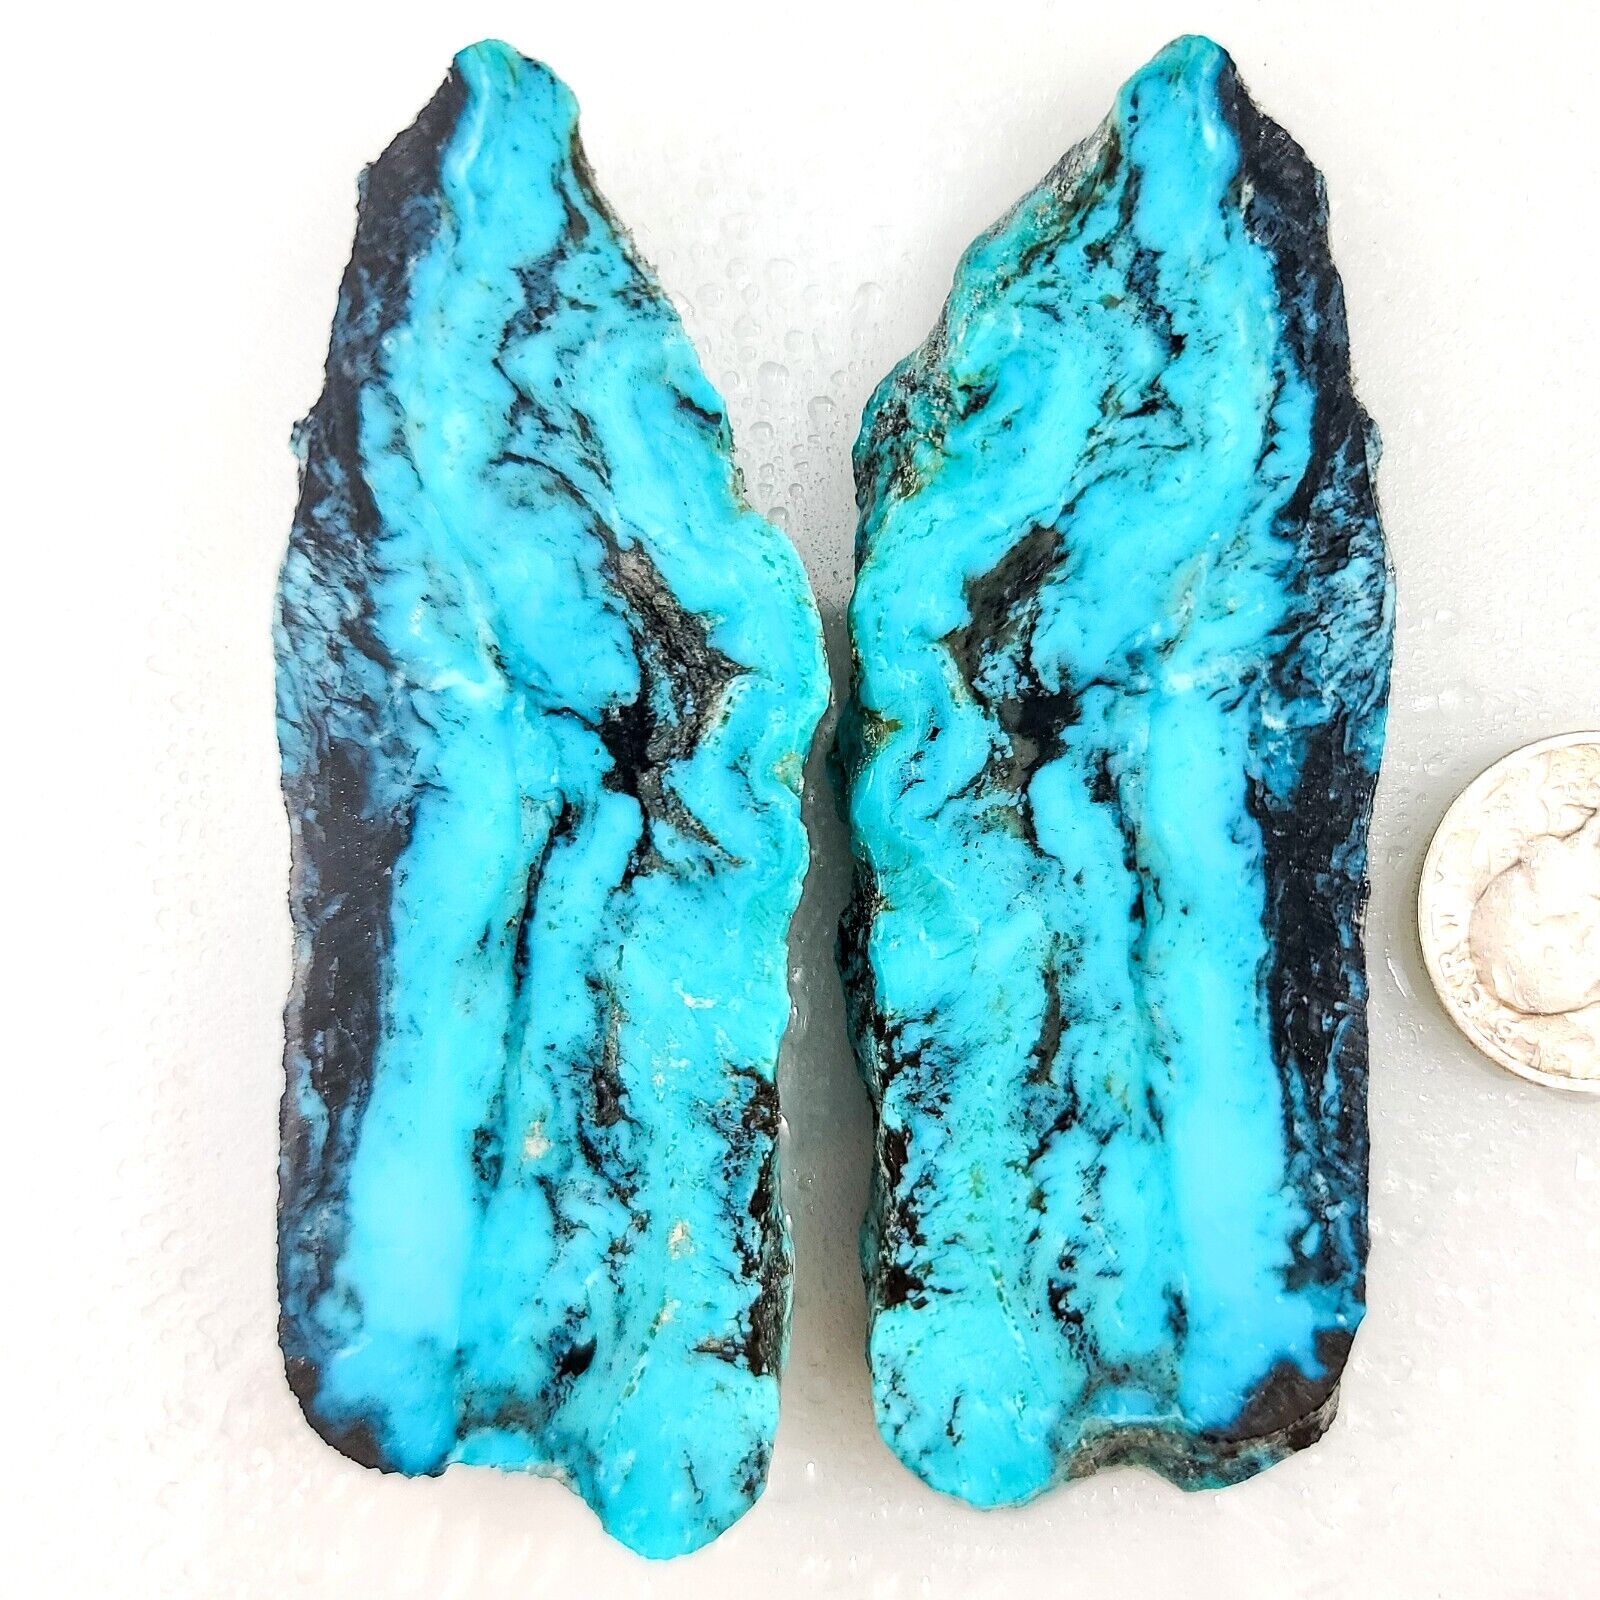 GS444 Rough slabs High Blue Ithaca Peak Turquoise book-matched pair 82.4gr